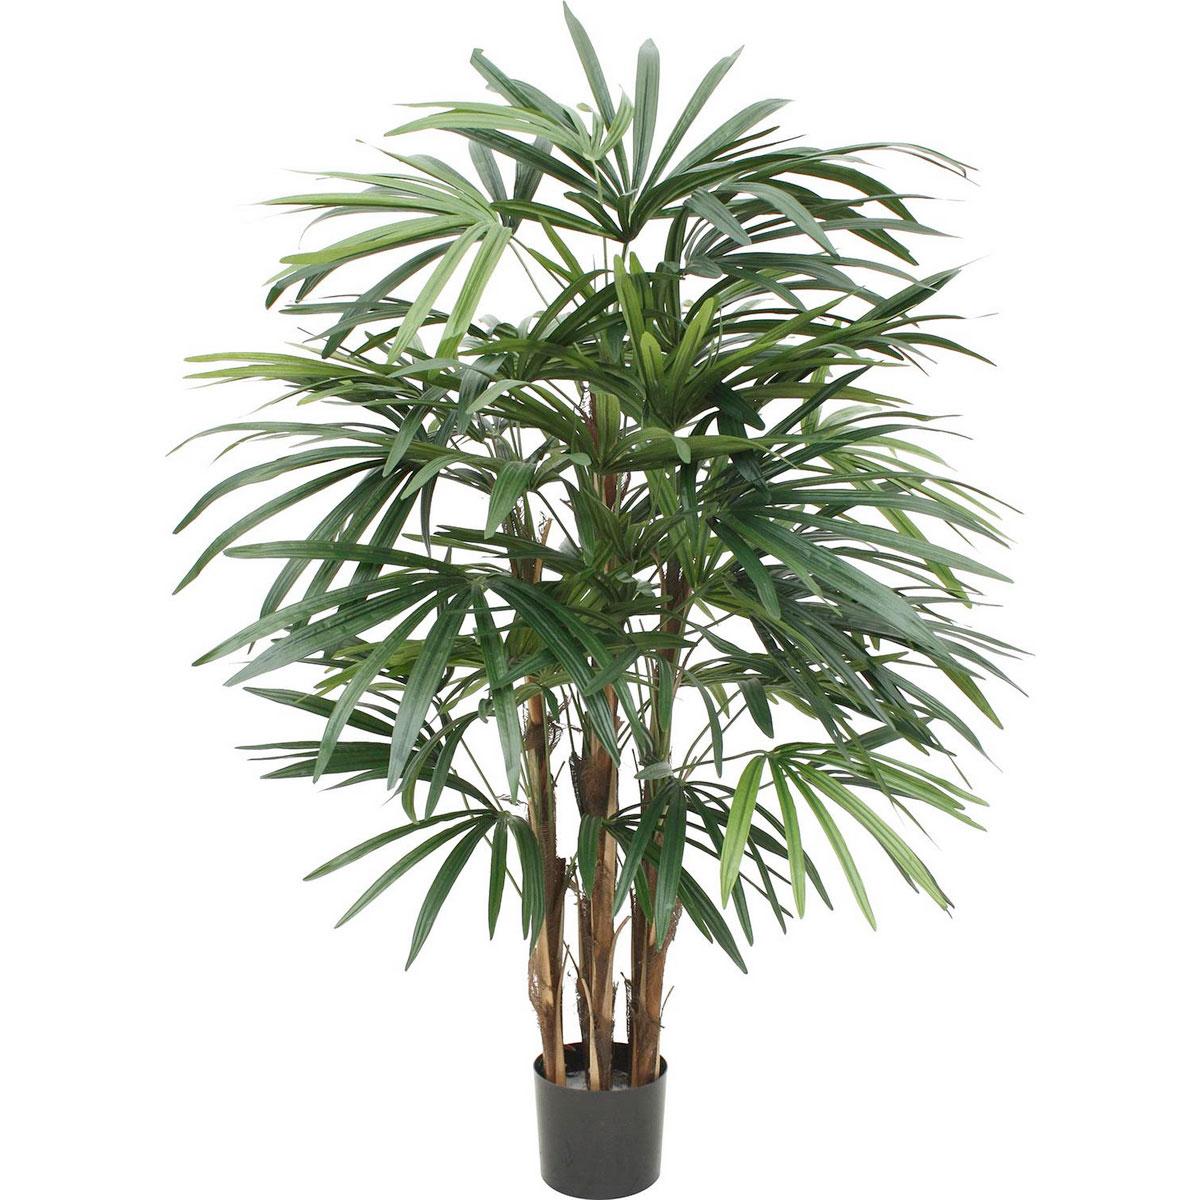 RHAPIS PALM DELUXE Artificial Tree Plant